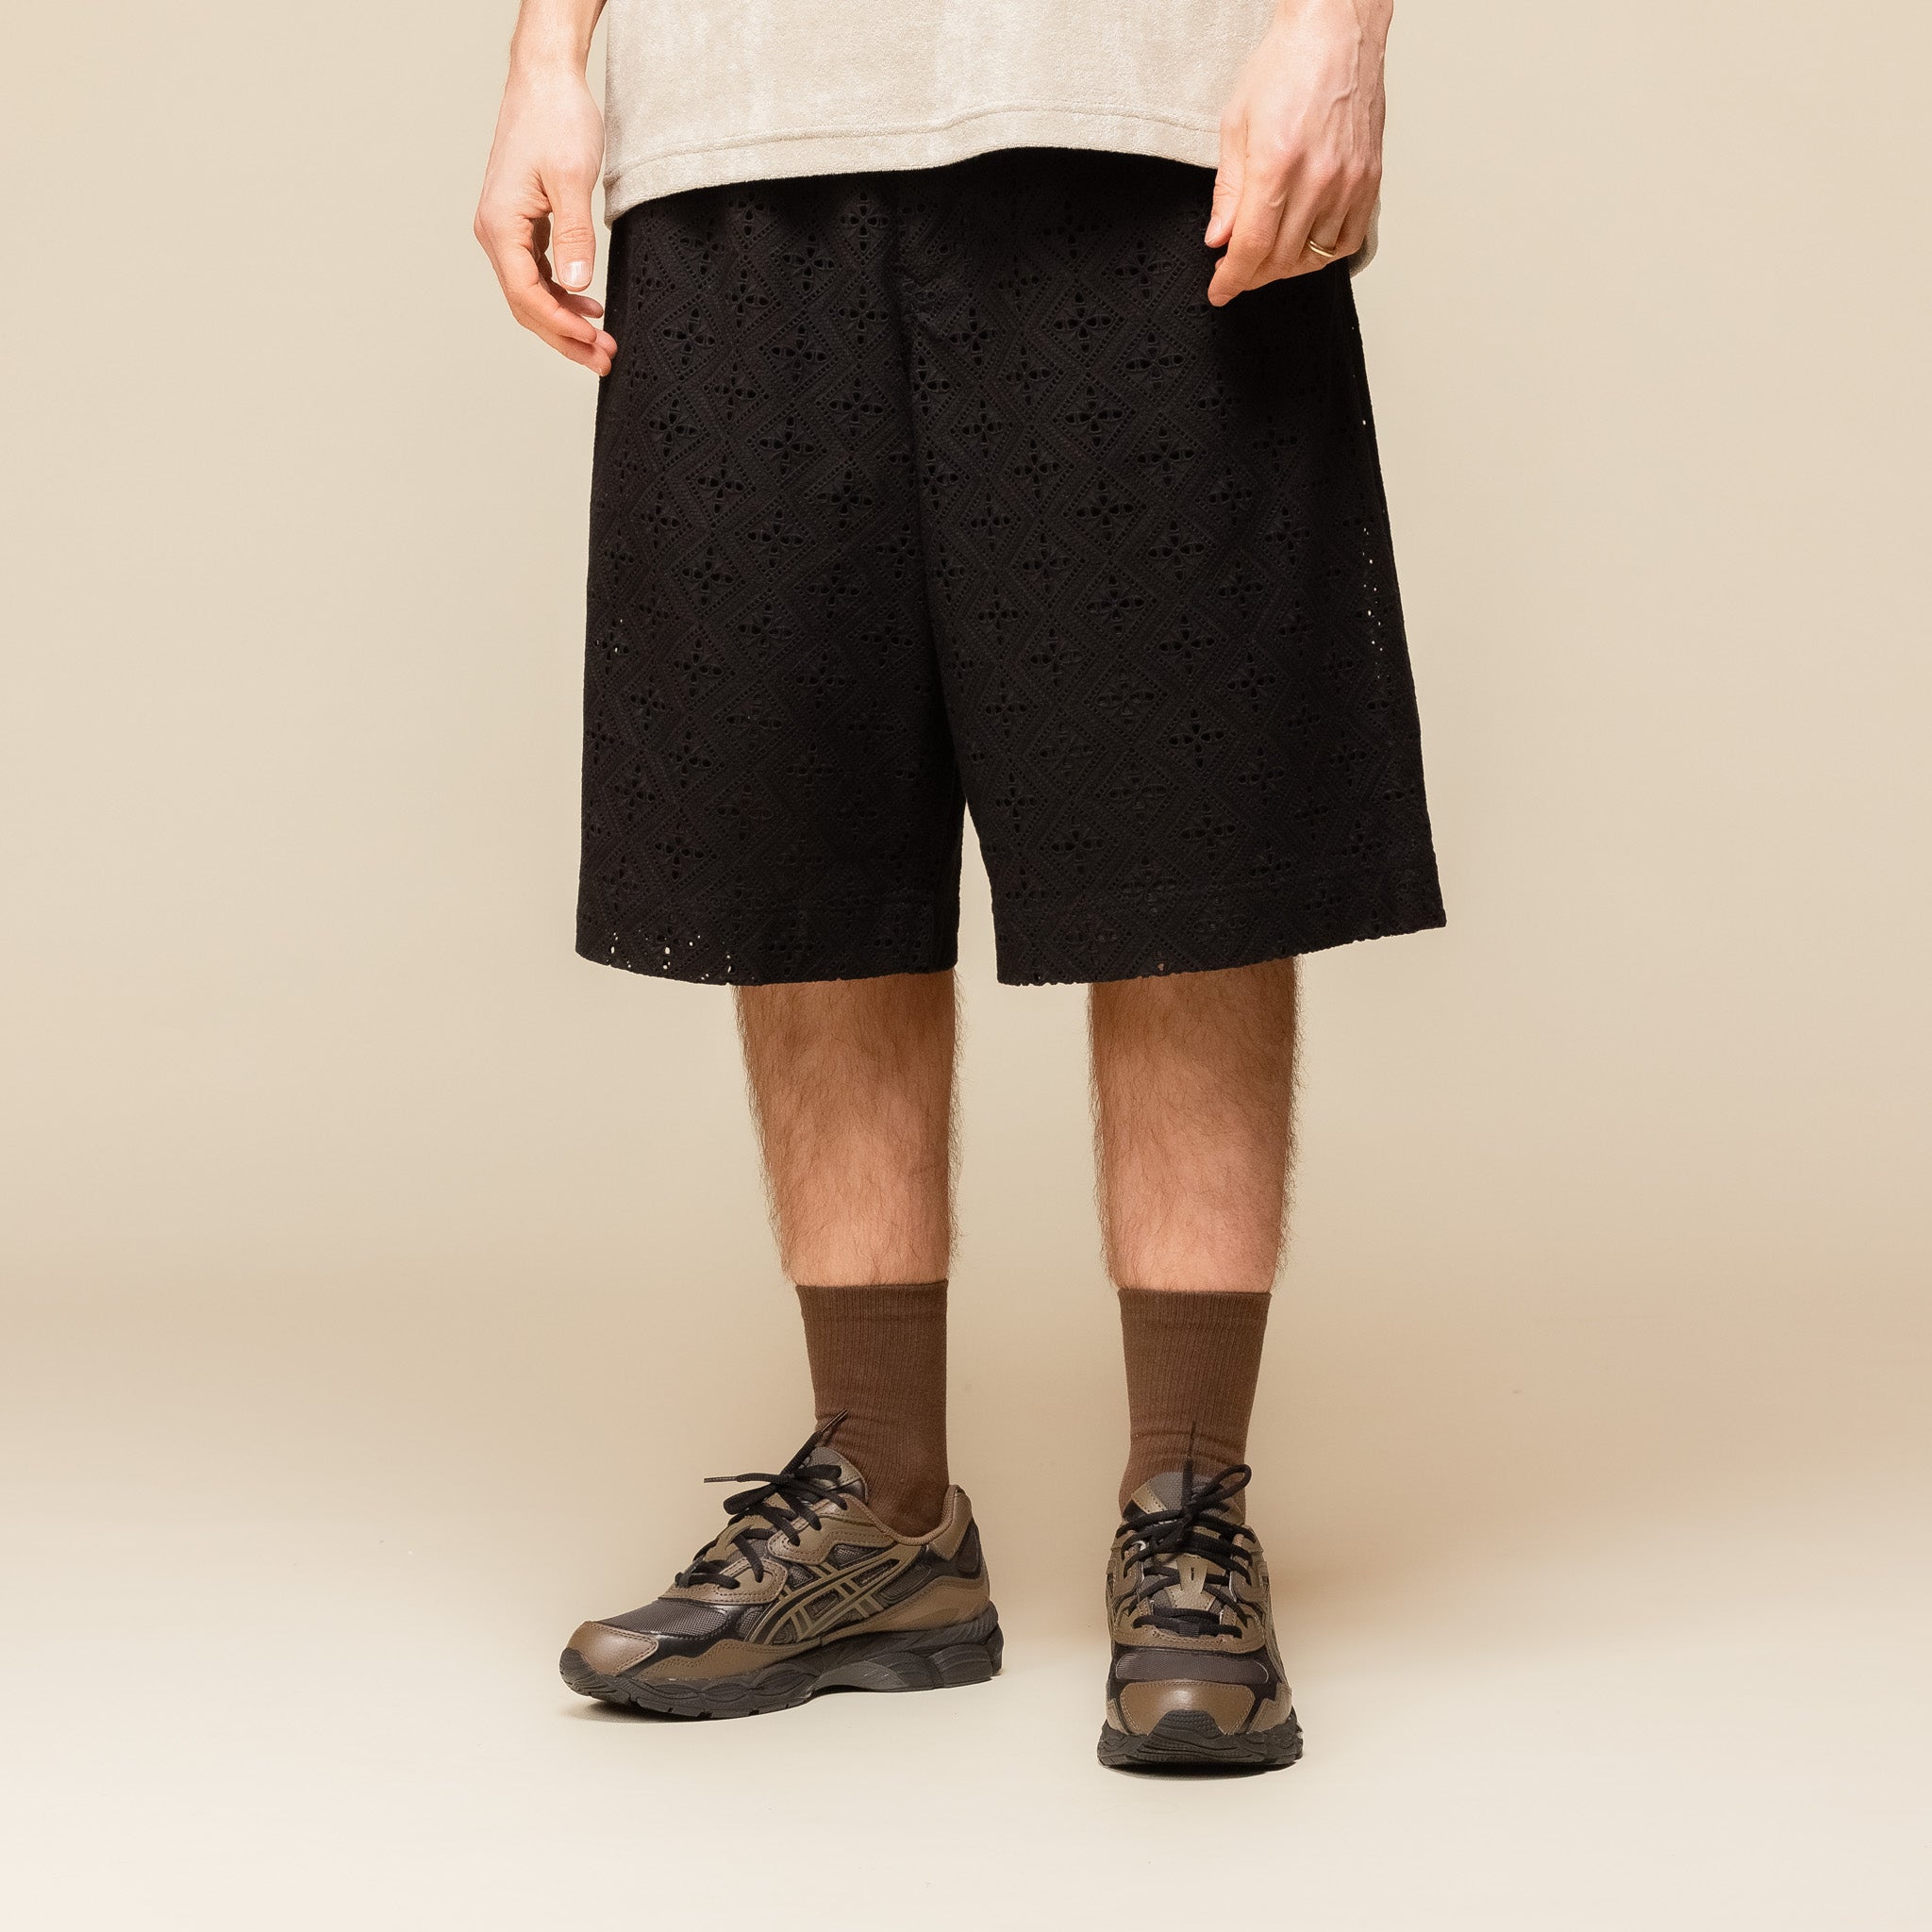 Merely Made - Premium Flower Lace Wide Shorts - Black "merely made shorts" "merely made website"